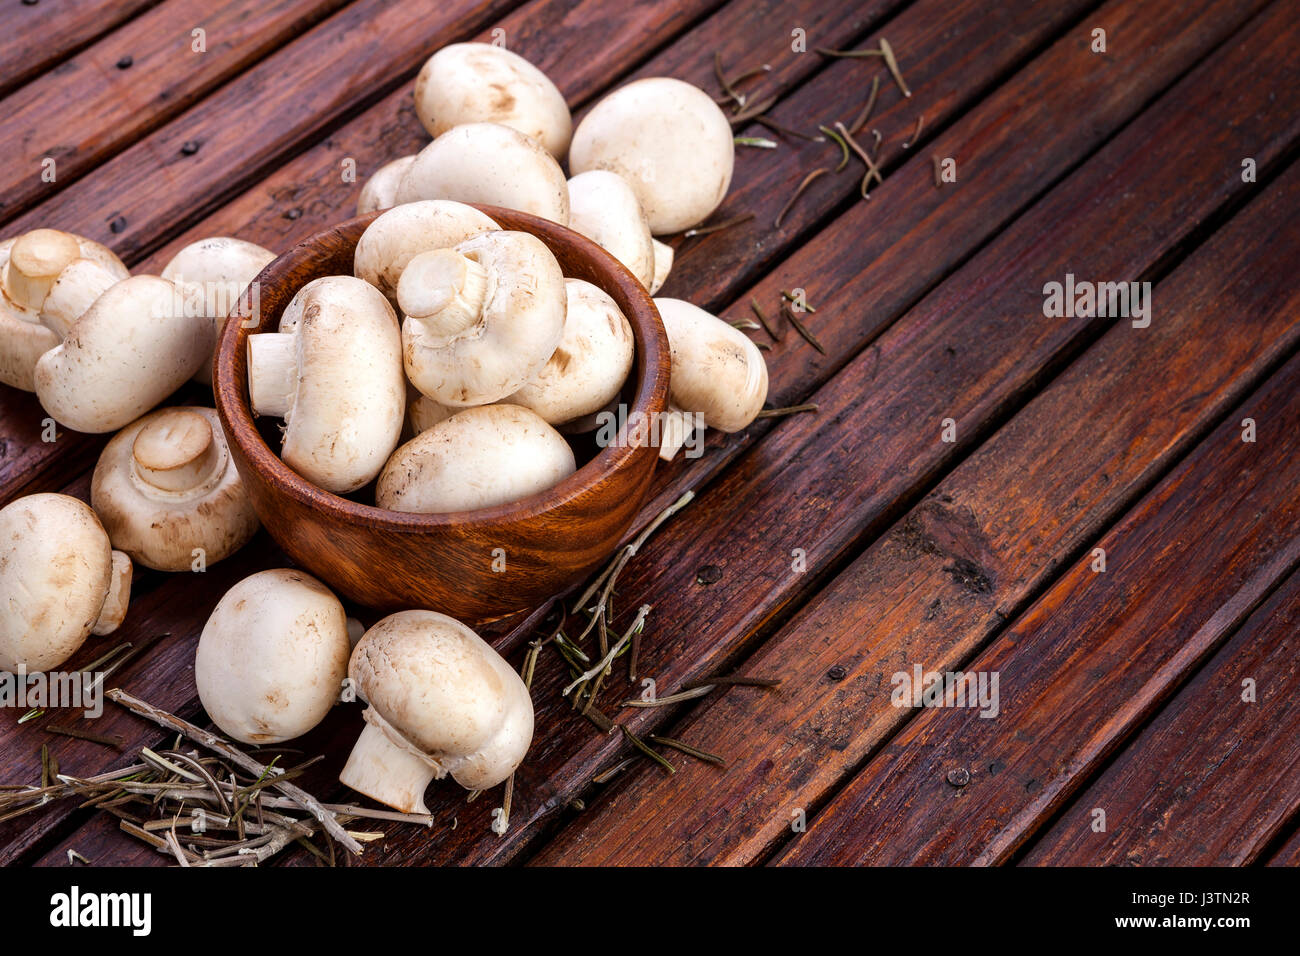 Mushrooms champignon on wooden background. Copy space. Stock Photo